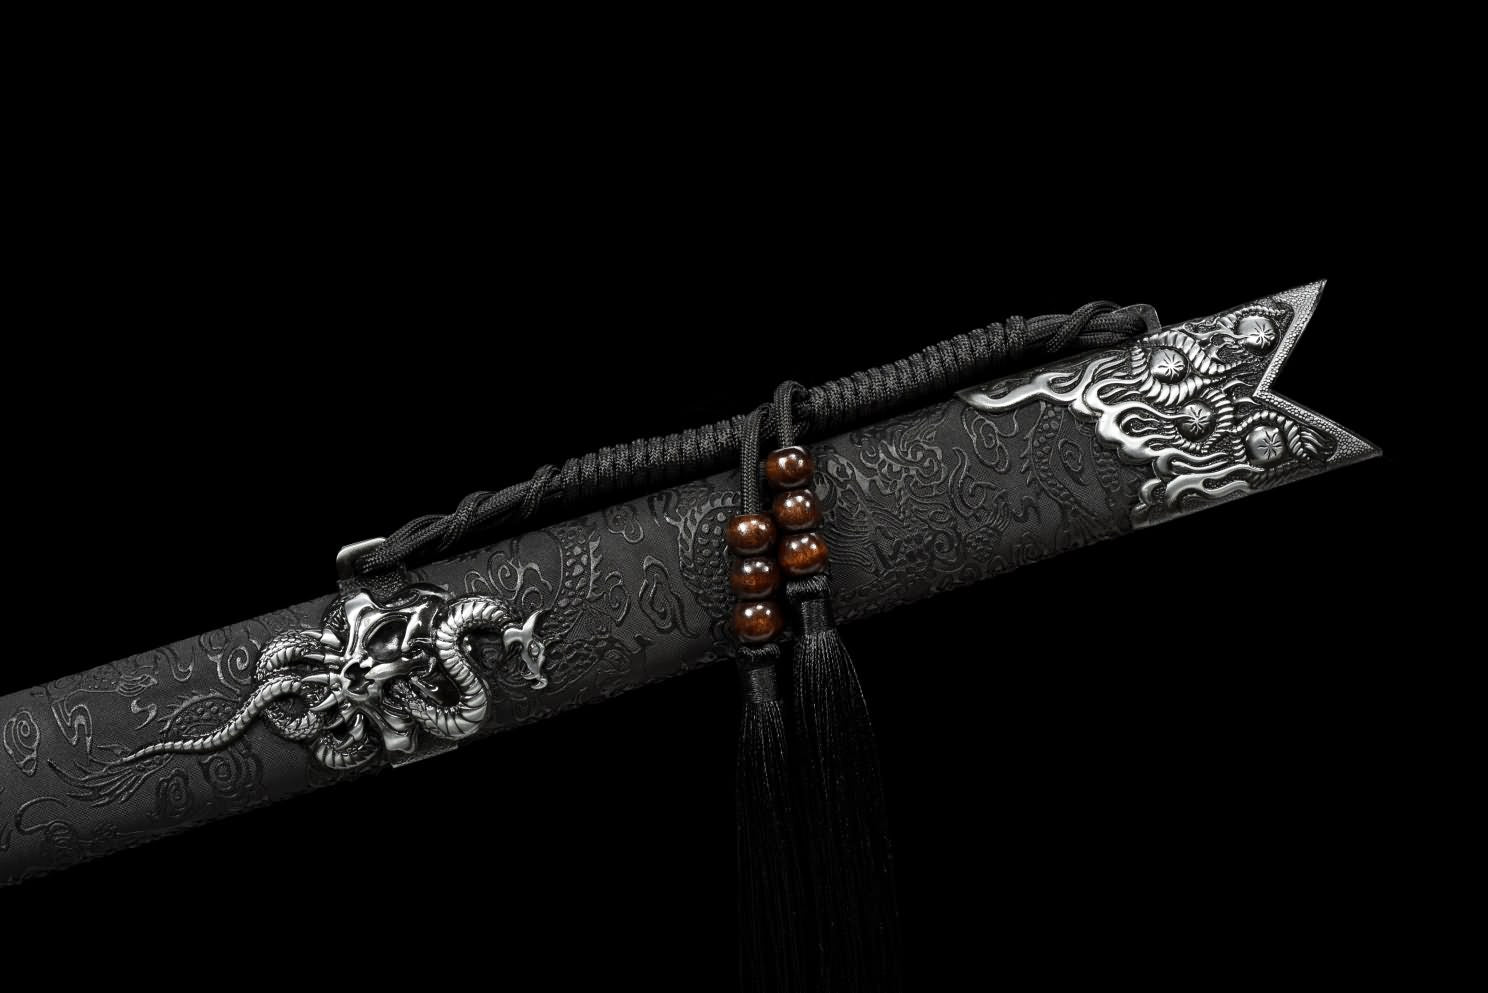 LOONGSWORD,chinese sword,Dragon Tang dao,Battle Ready,Hand Forged High Carbon Steel Blade